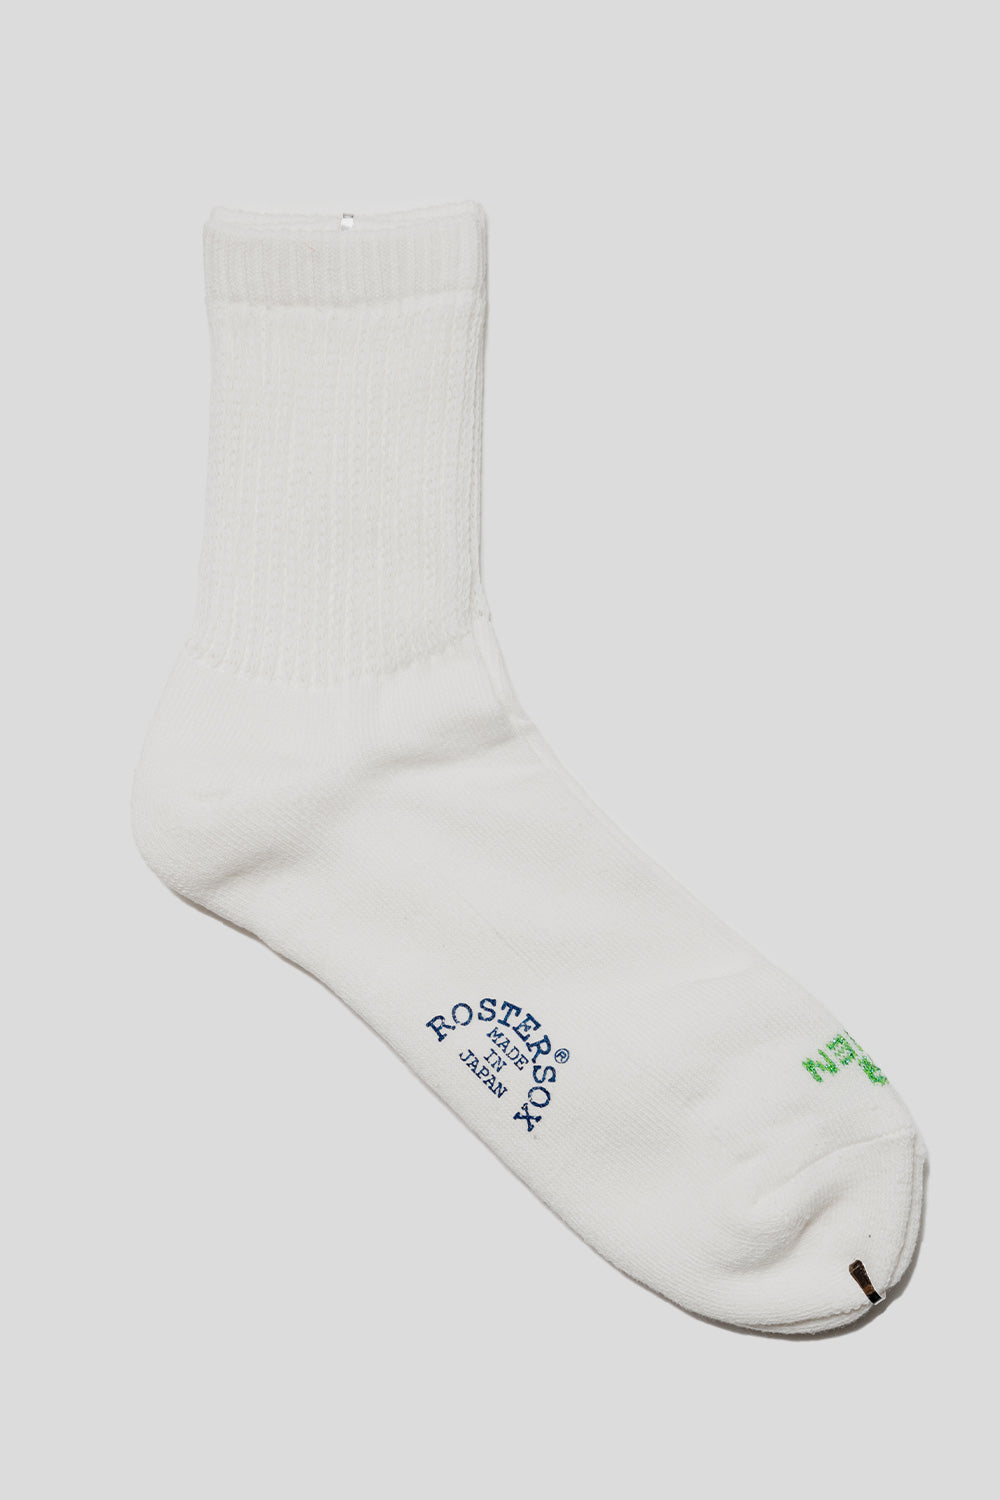 Rostersox Linen and Cotton Socks in White